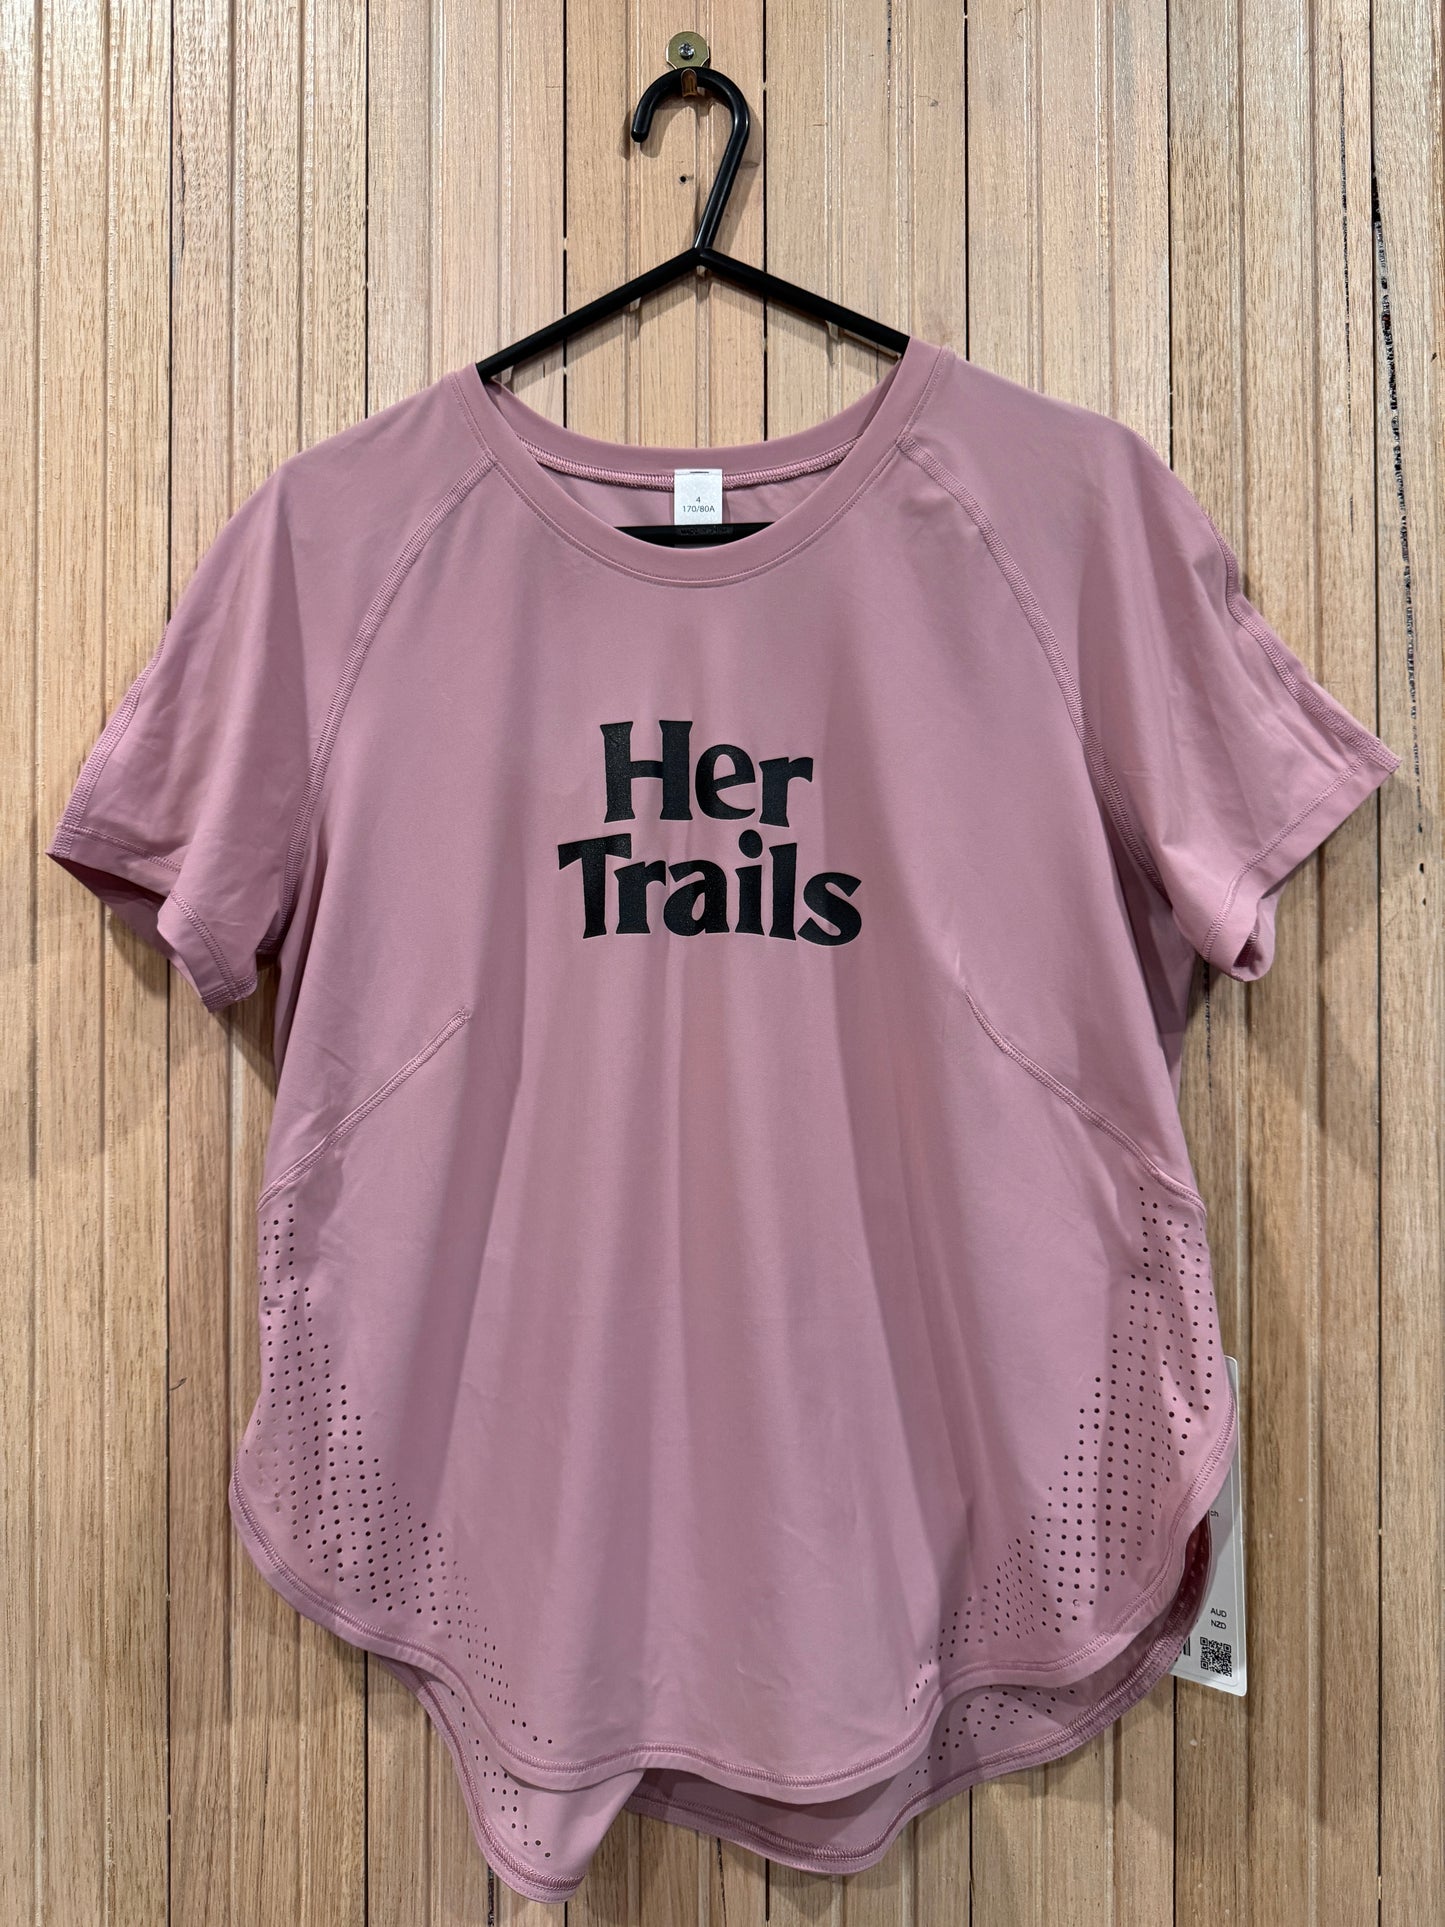 Her Trails x Lululemon Pink Technical Top (UVP)